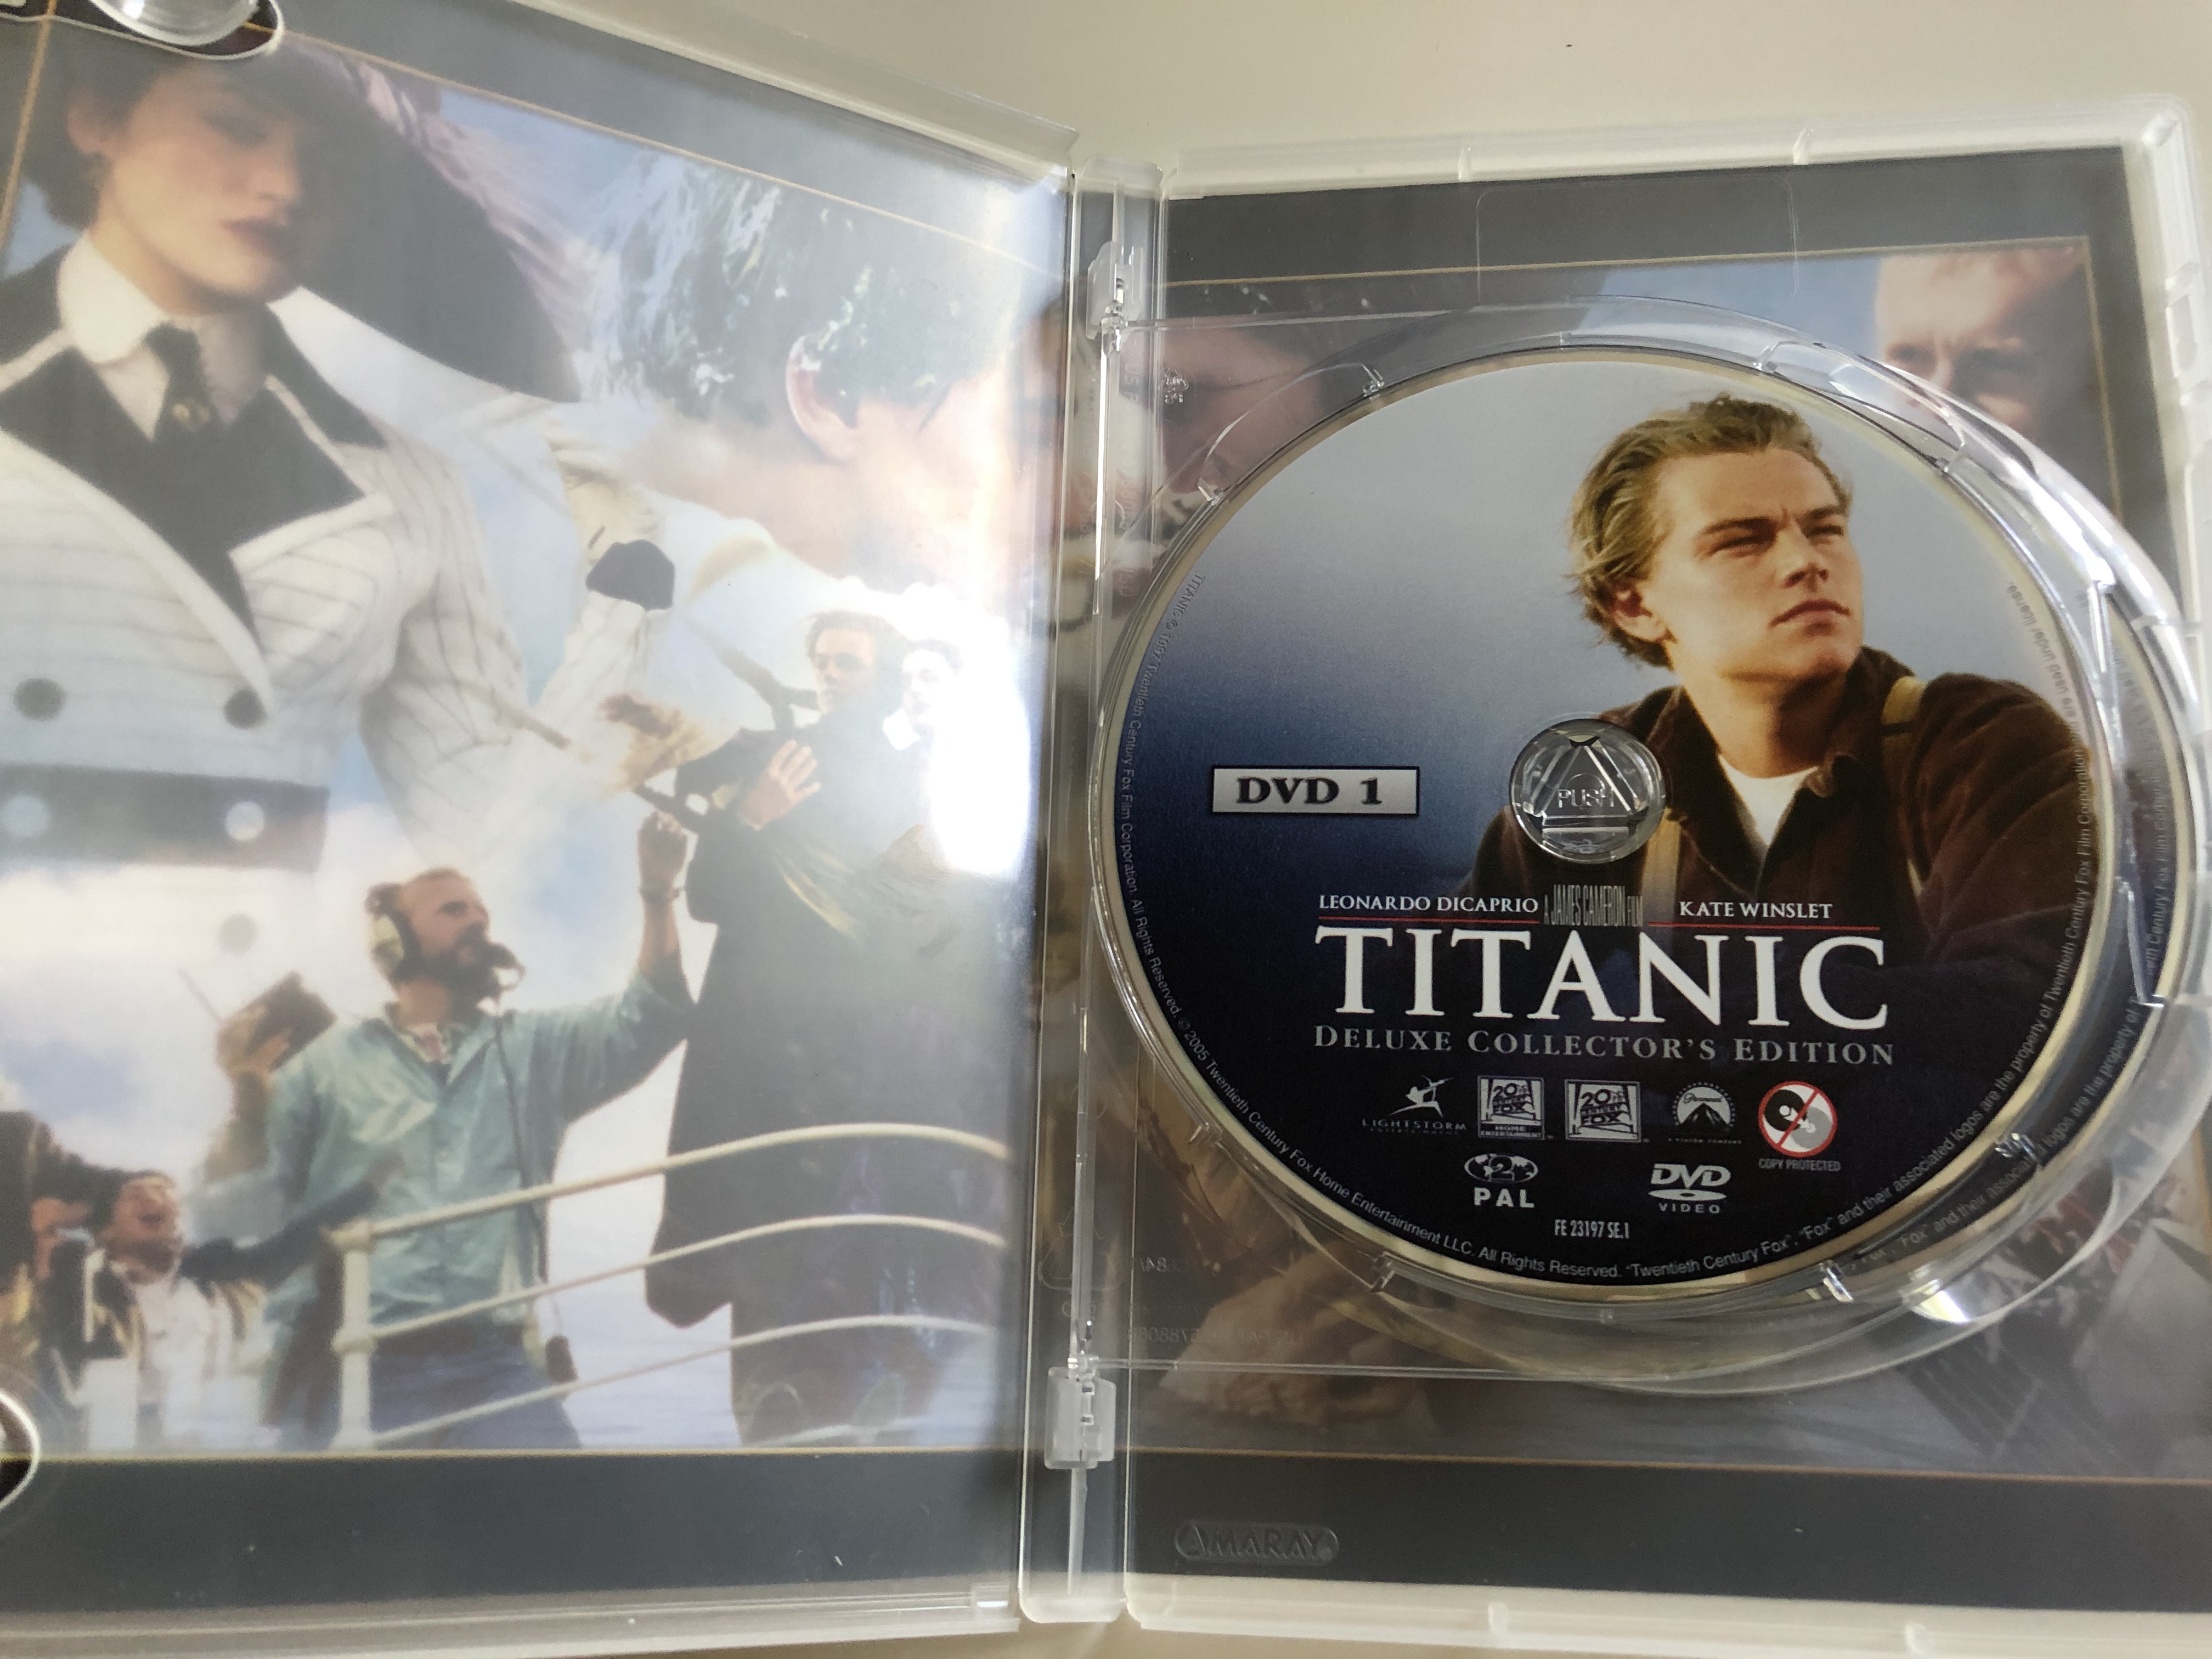 titanic-1997-dvd-deluxe-collectors-edition-2-dvd-directed-by-james-cameron-starring-leonardo-dicaprio-kate-winslet-billy-zane-kathy-bates-frances-fisher-bernard-hill-2-.jpg